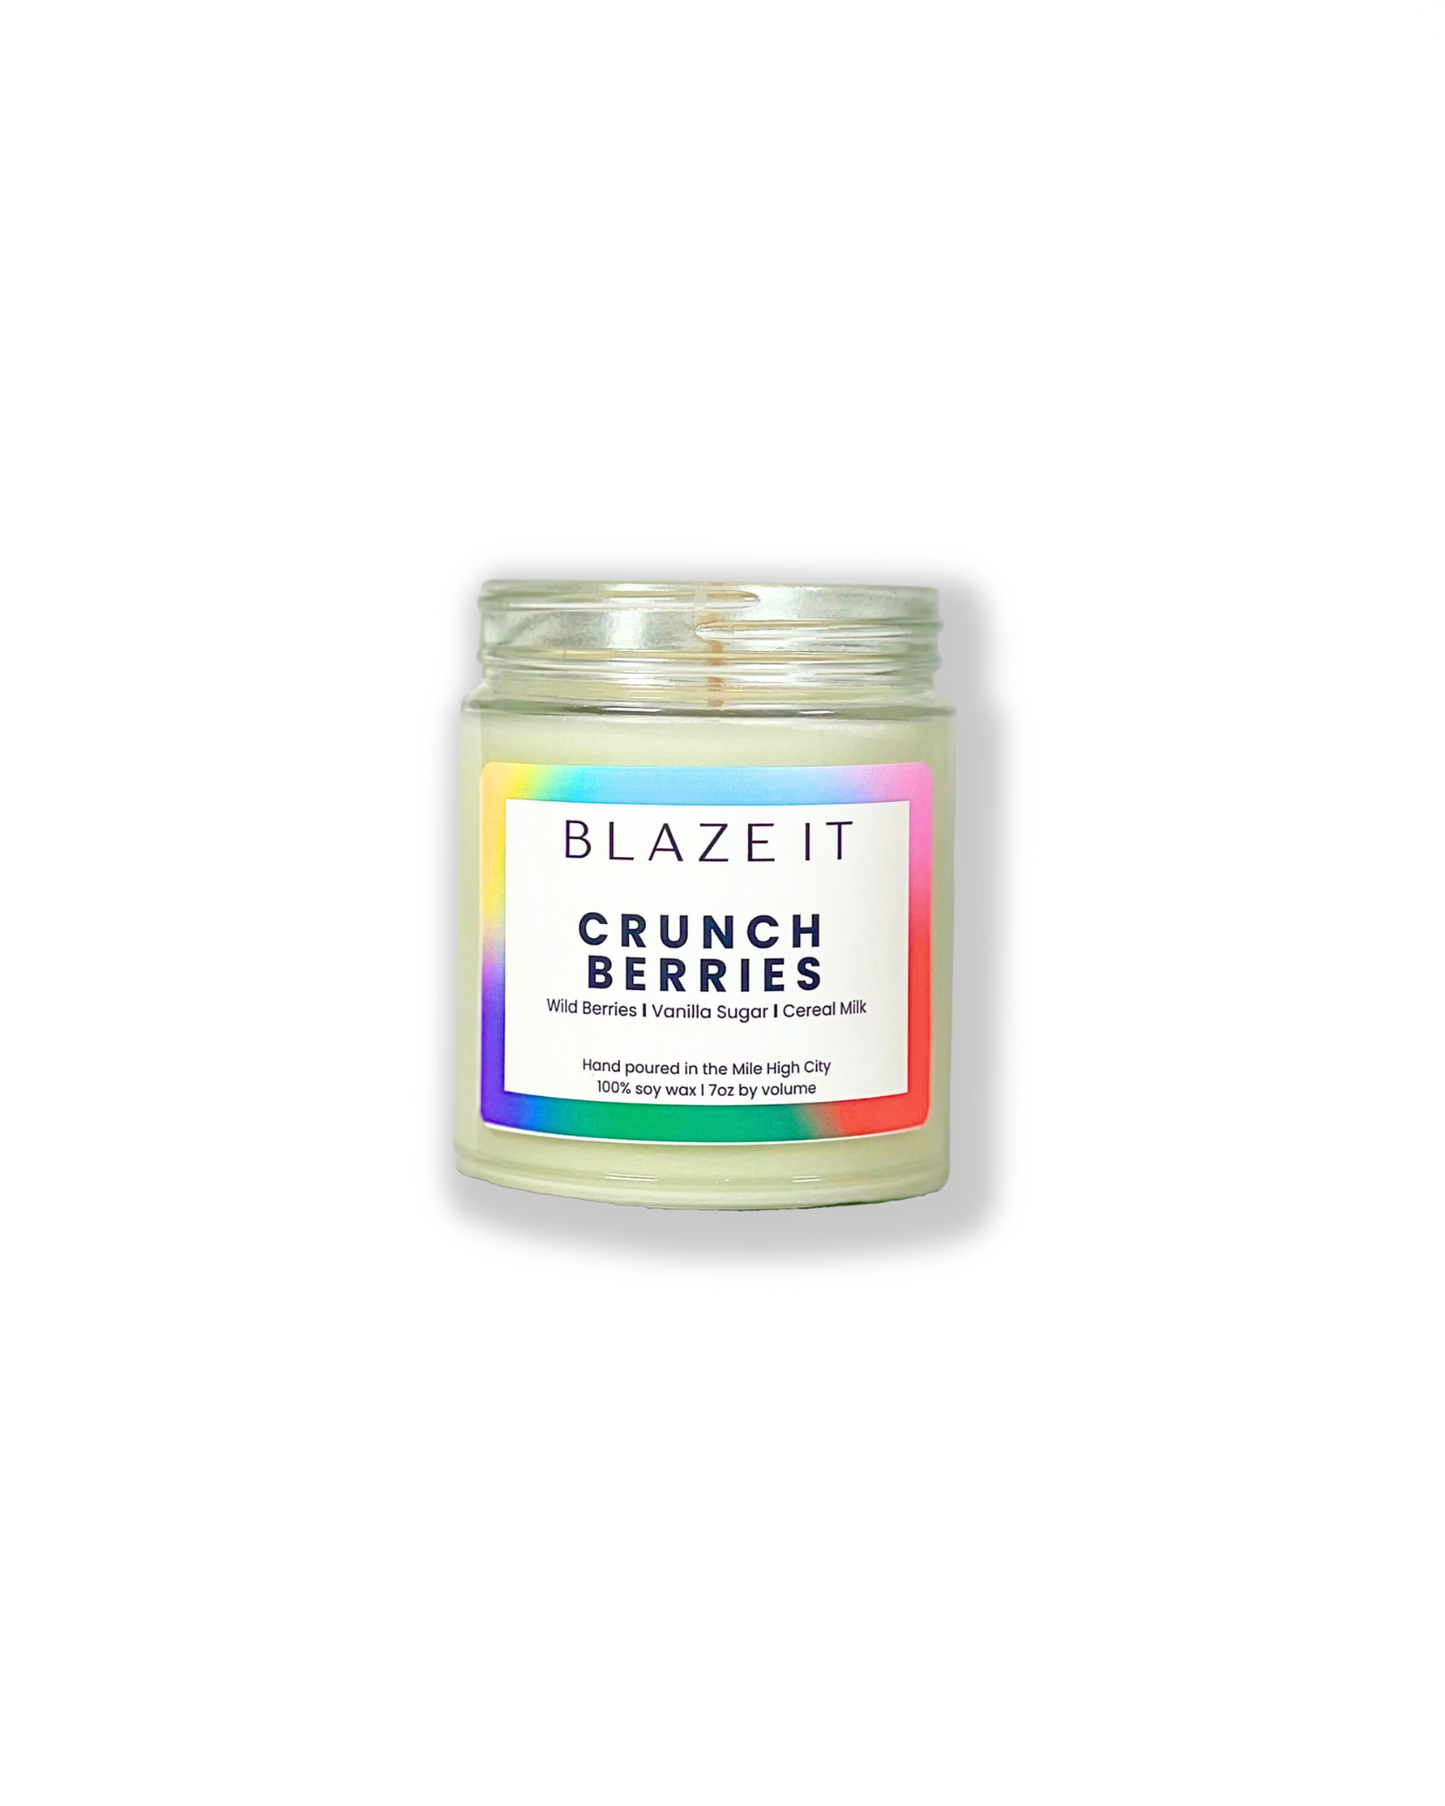 Crunch Berries candle - Blaze it Candle co